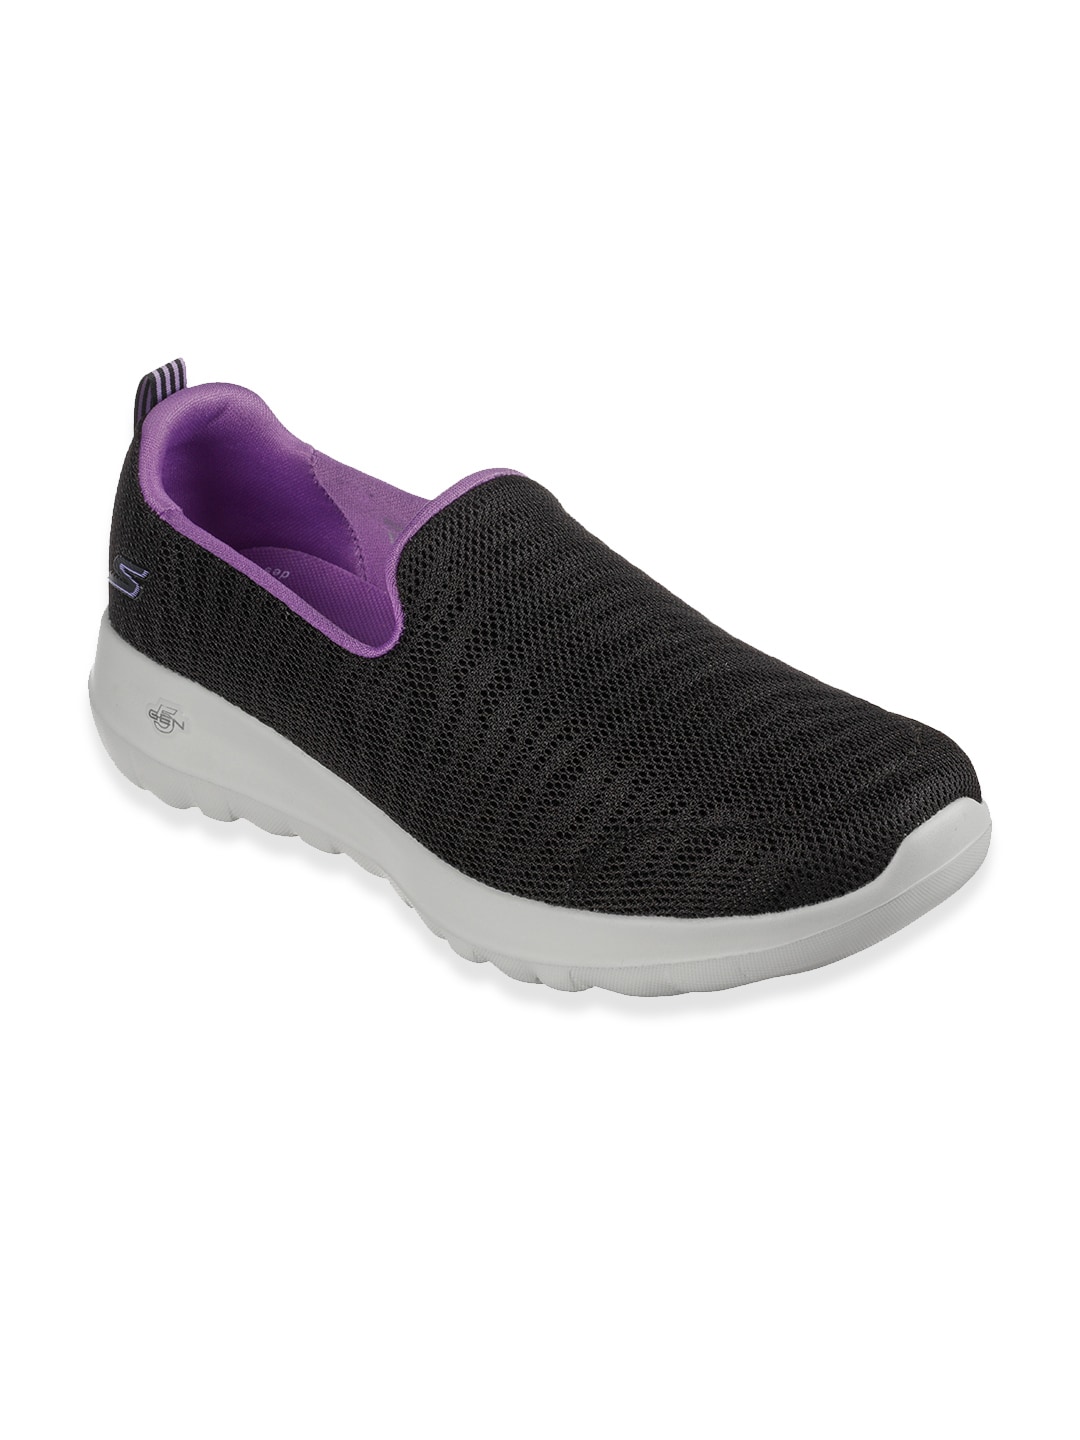 Skechers Women Black Sports Shoes Price in India